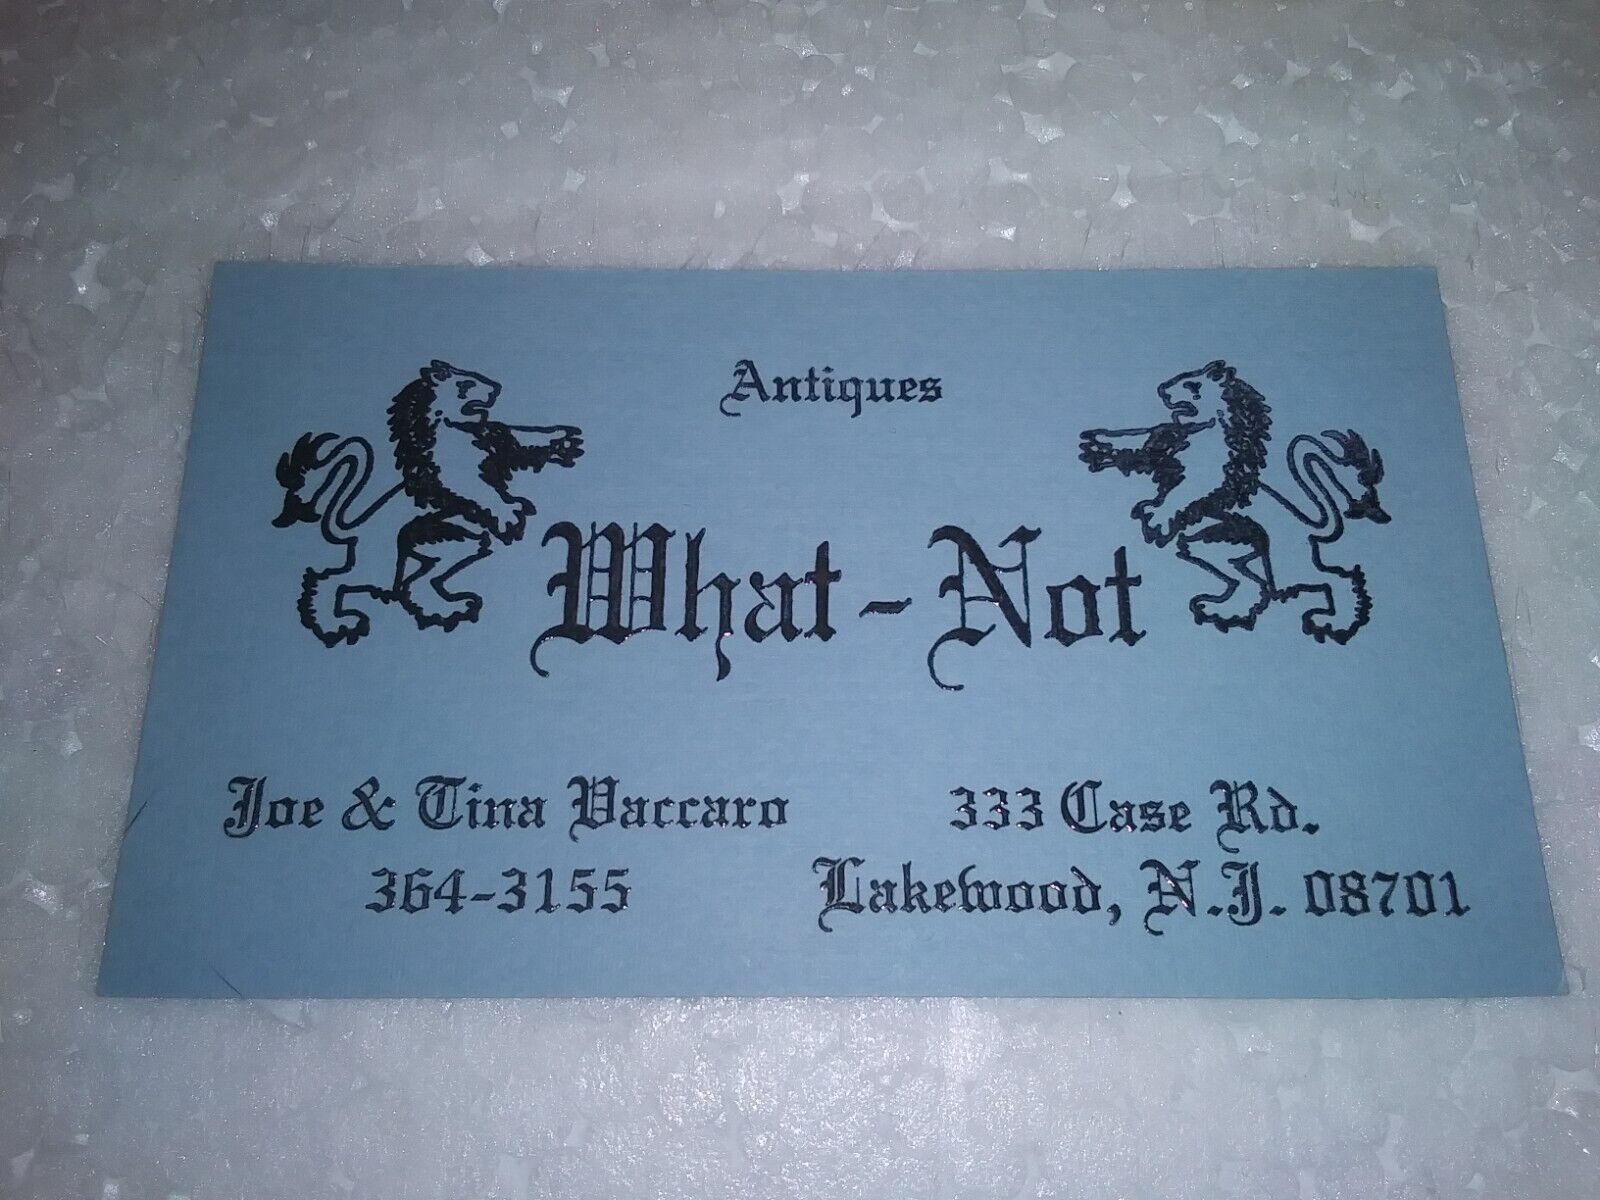 Vintage What-Not Antiques Store Lakewood New Jersey Business Card